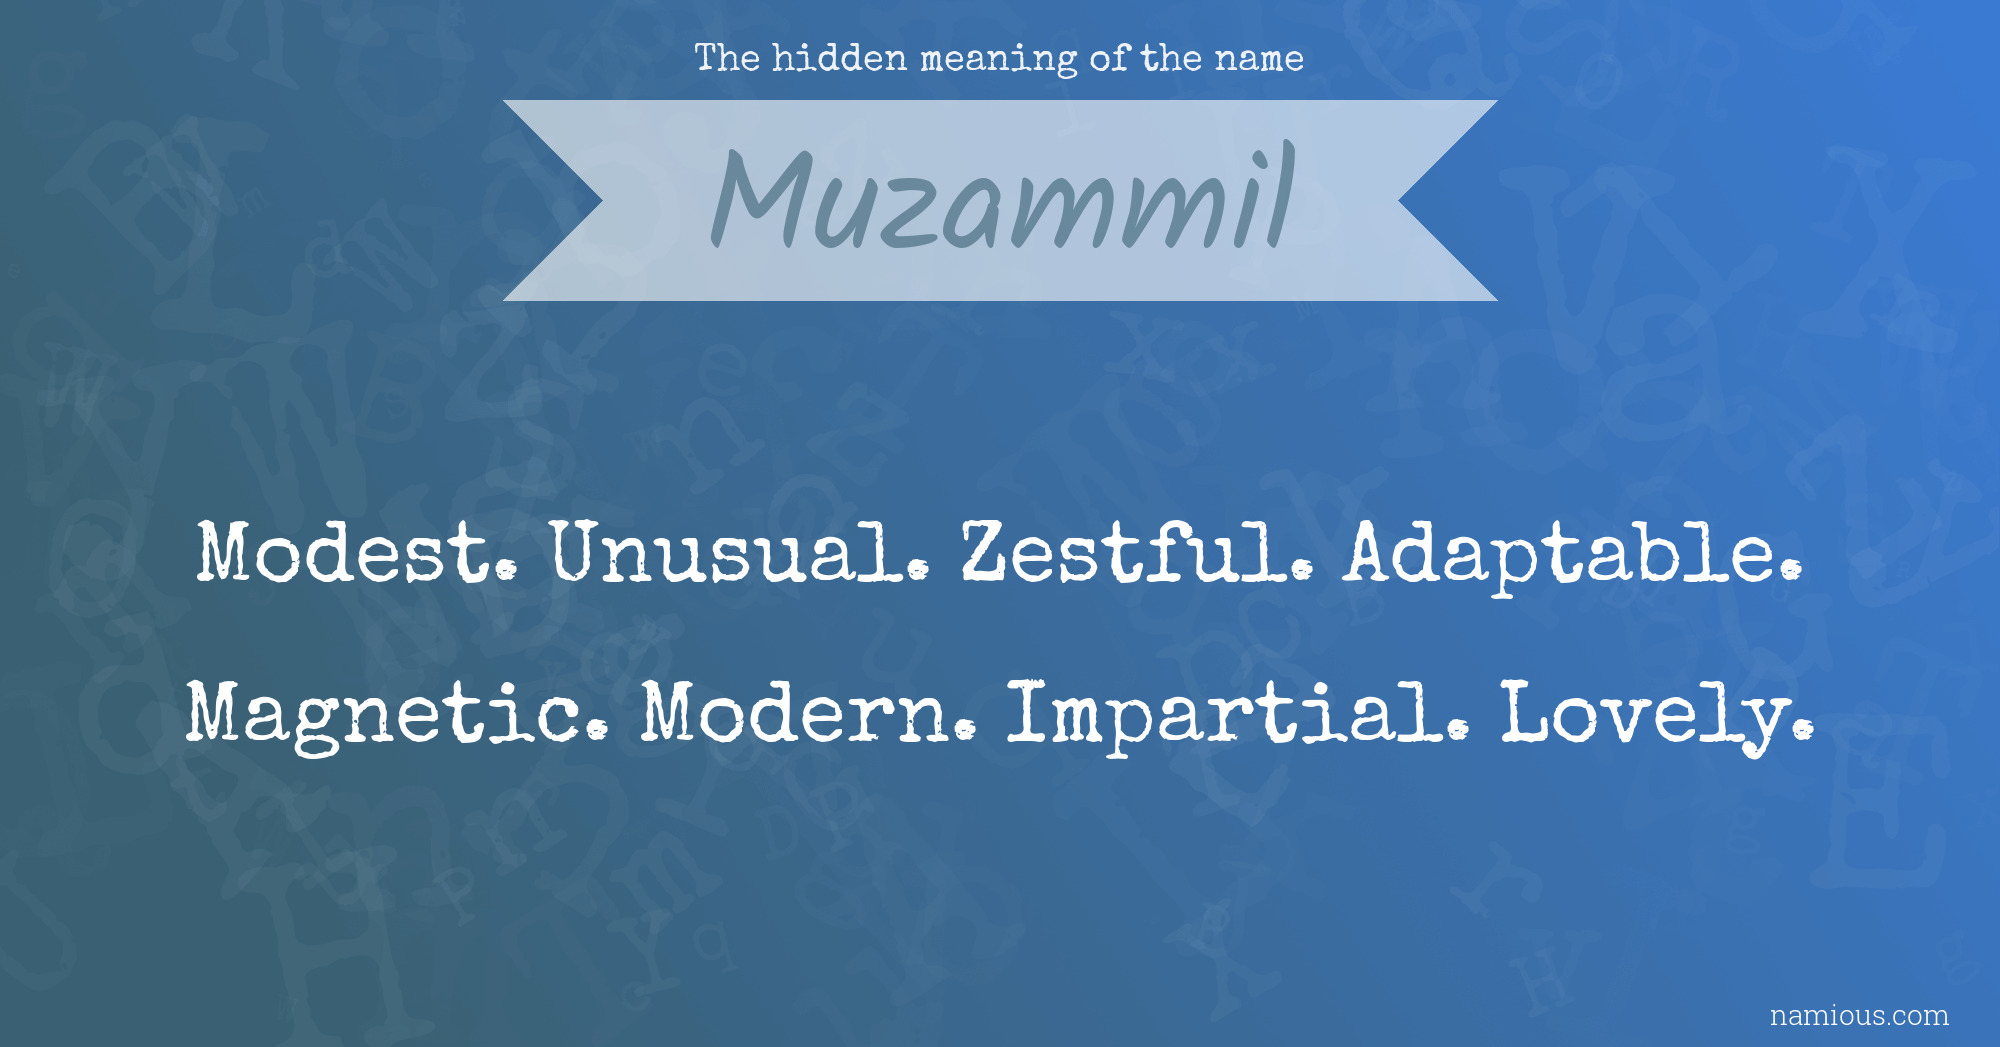 The hidden meaning of the name Muzammil